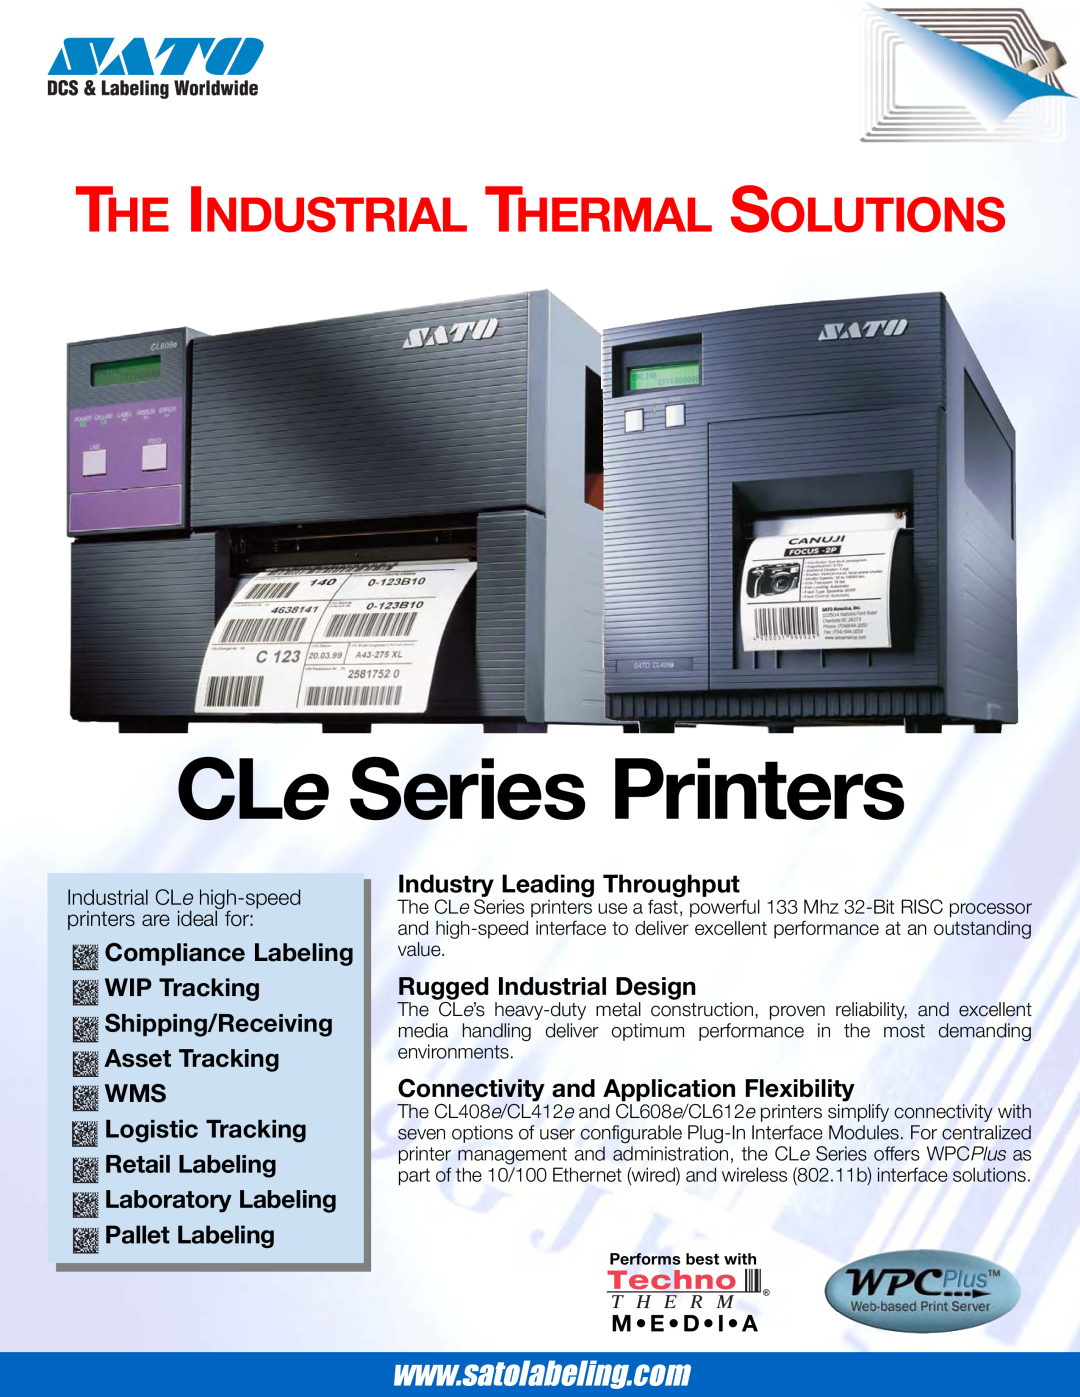 SATO manual CLe Series Printers, The Industrial Thermal Solutions, Pallet Labeling, Industry Leading Throughput, Media 